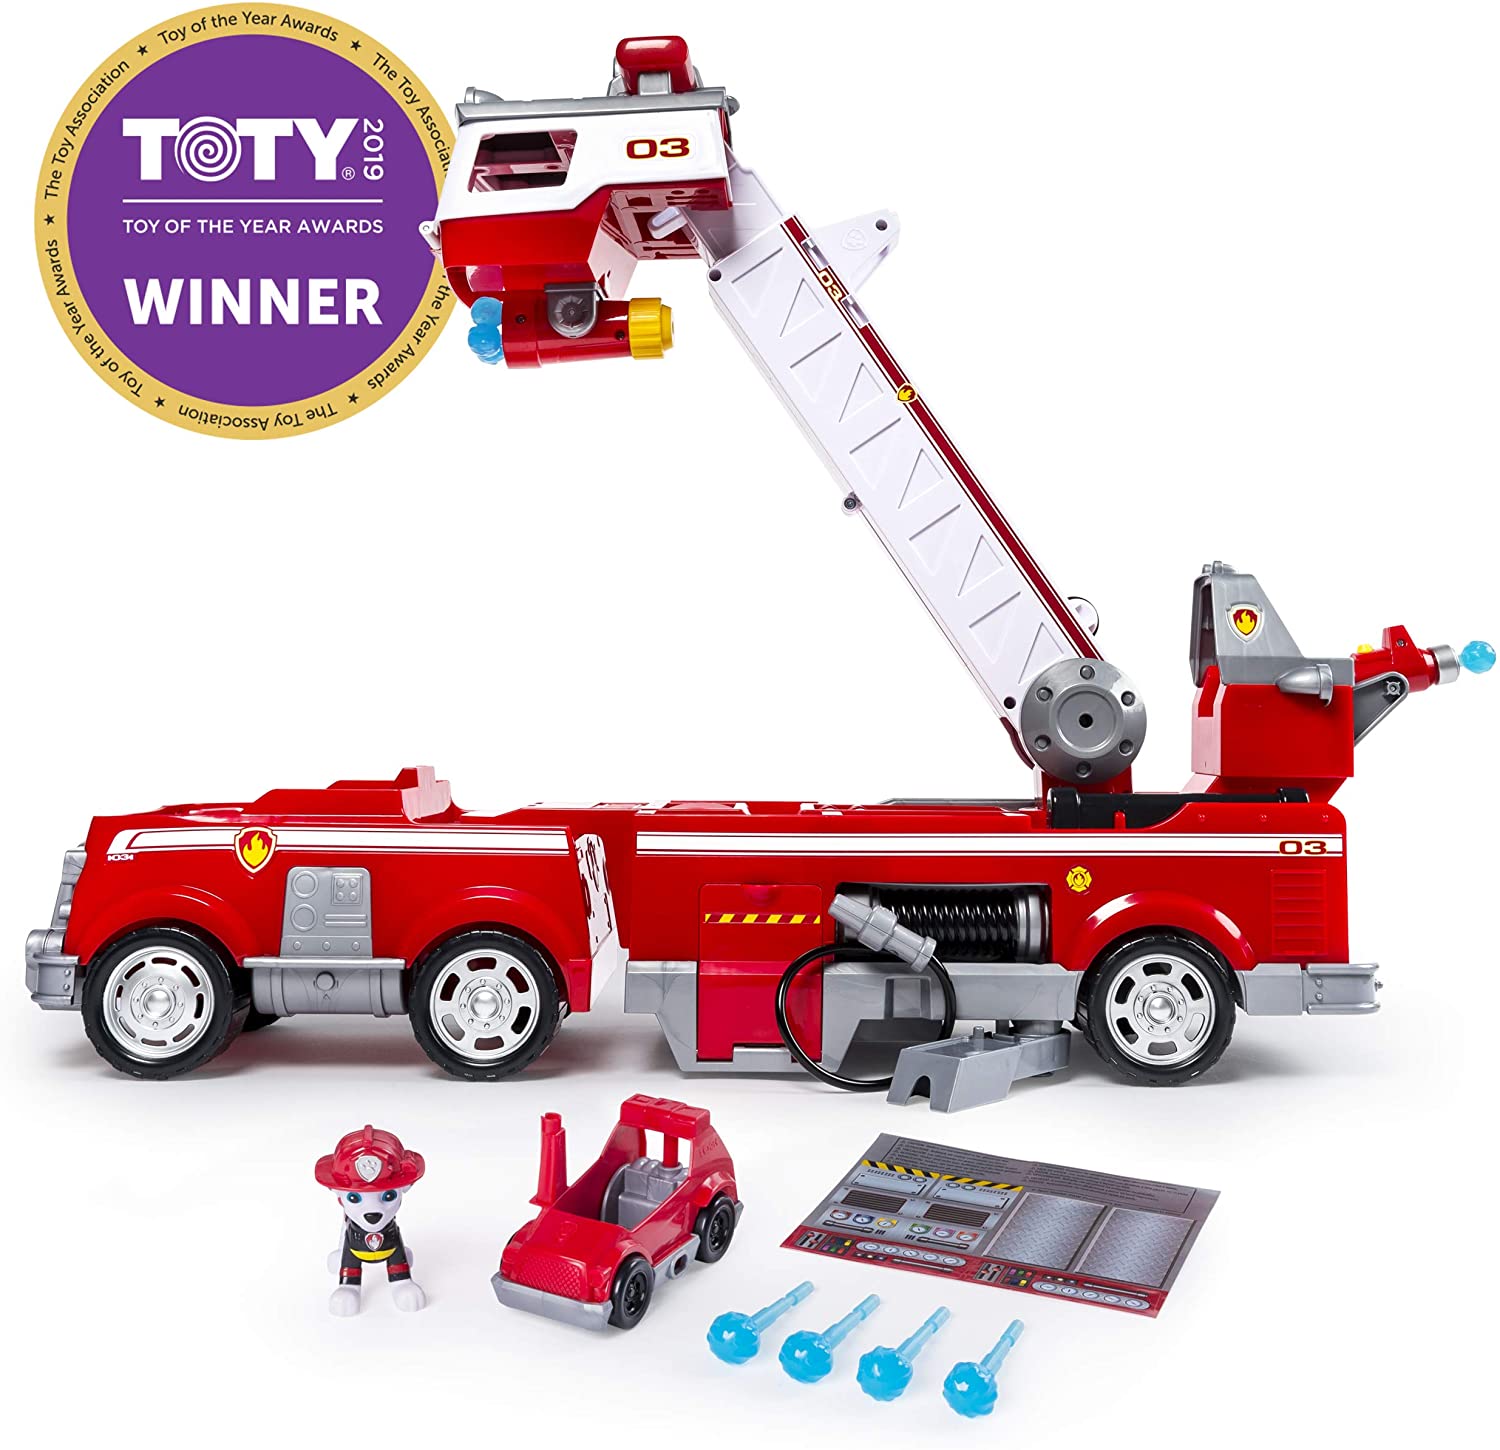 PAW Patrol - Ultimate Rescue Fire Truck with Extendable 2 Foot Tall Ladder, Ages 3 and Up